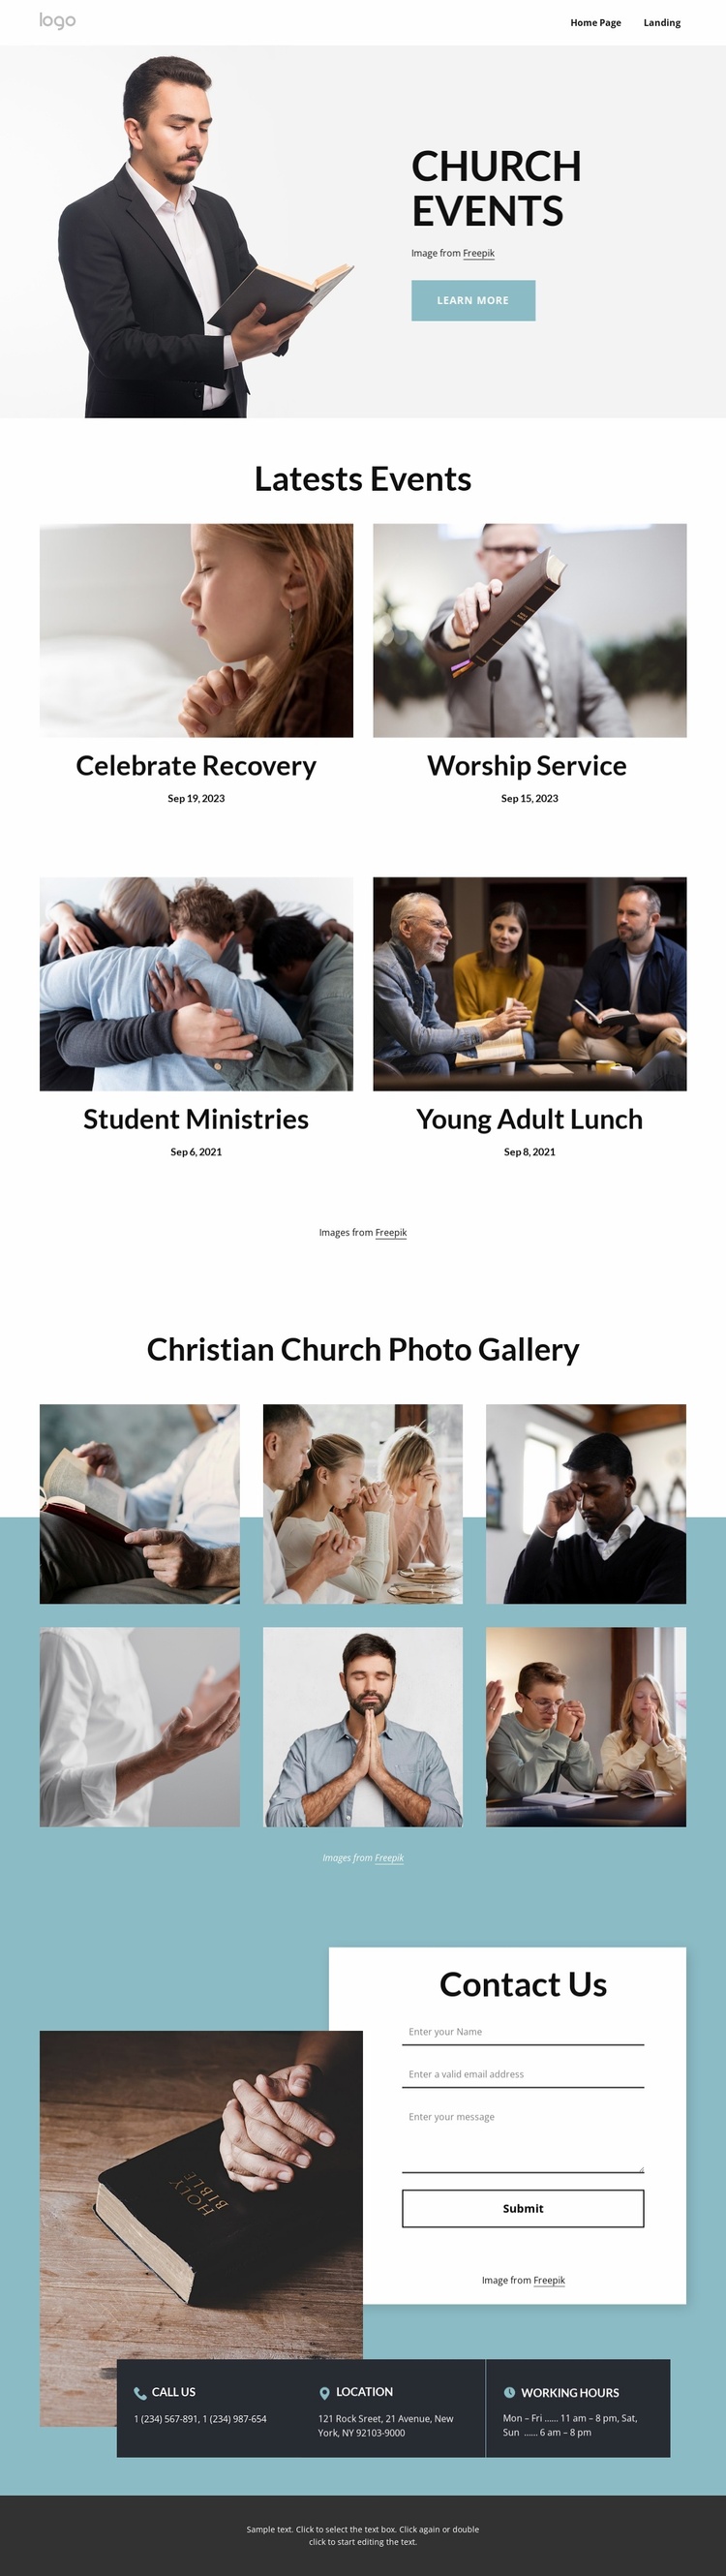 Church events Landing Page